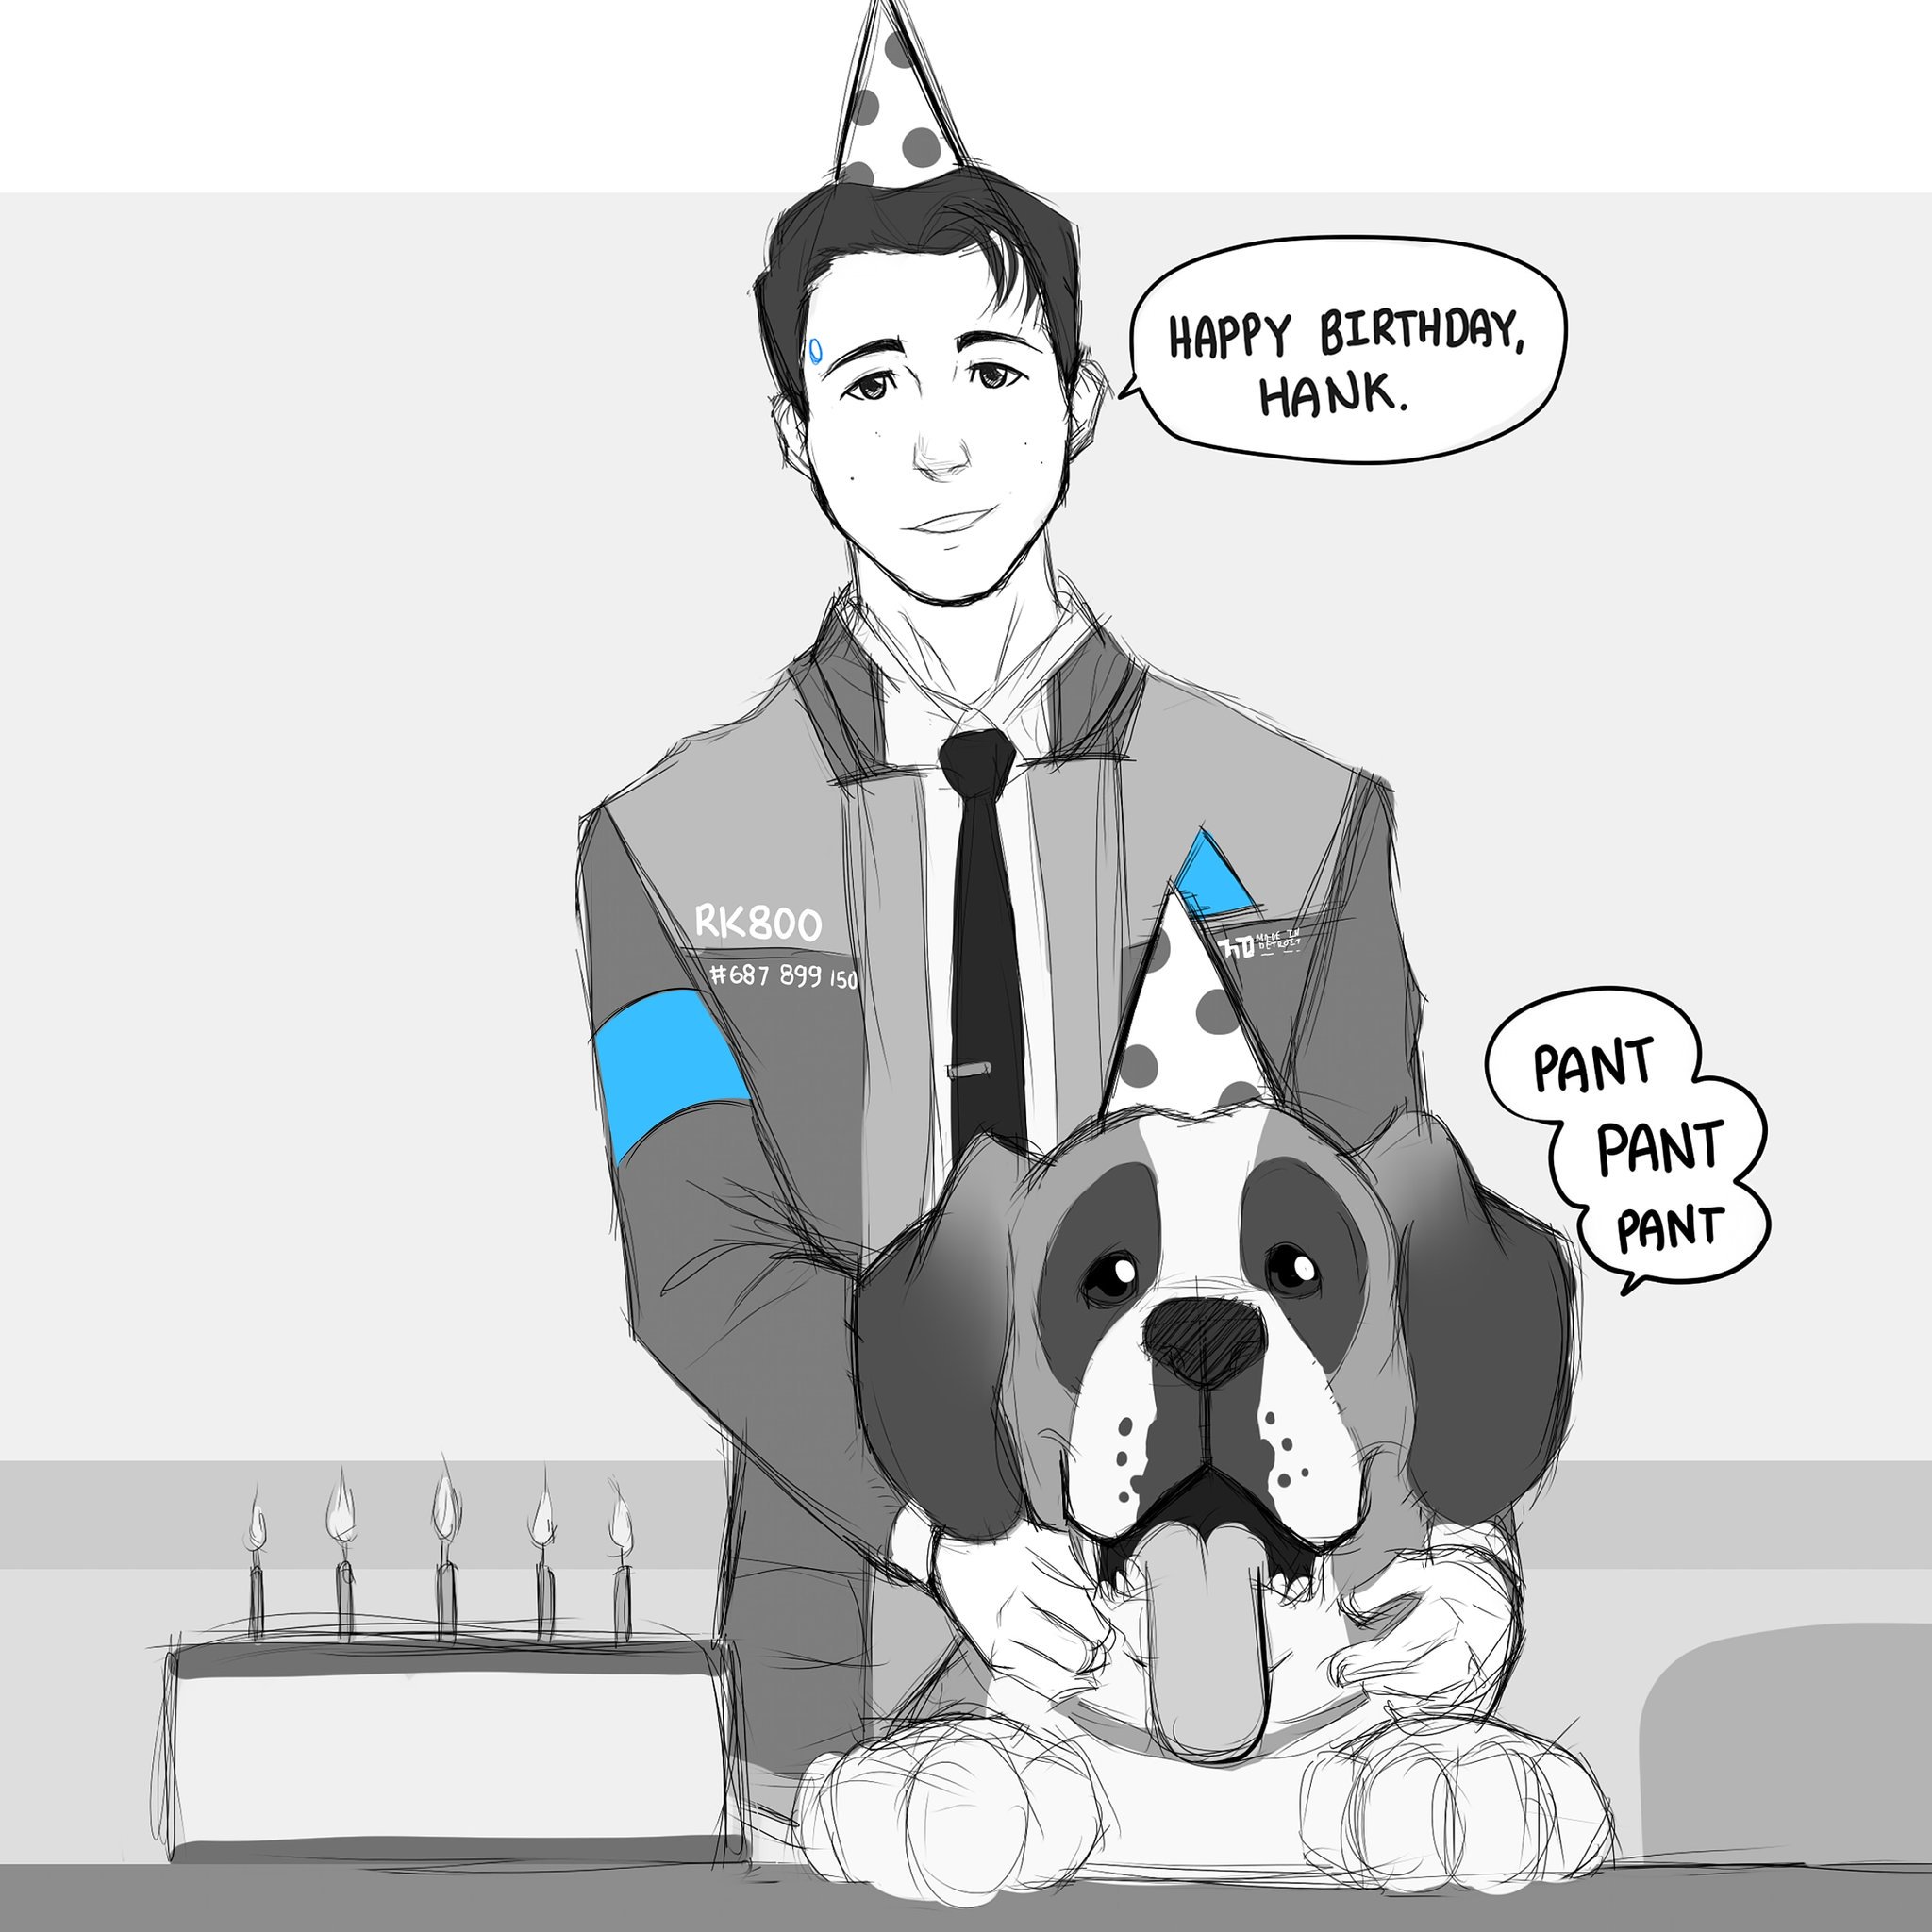 Alex Miller on X: Behold, my #detroitbecomehuman masterpiece, #connor and # sumo in party hats for today's #doodleoftheday 😂 You can read the full  short comic on my #tumblr @smudgeandfrank #dbhconnor #dbhsumo #dbh #